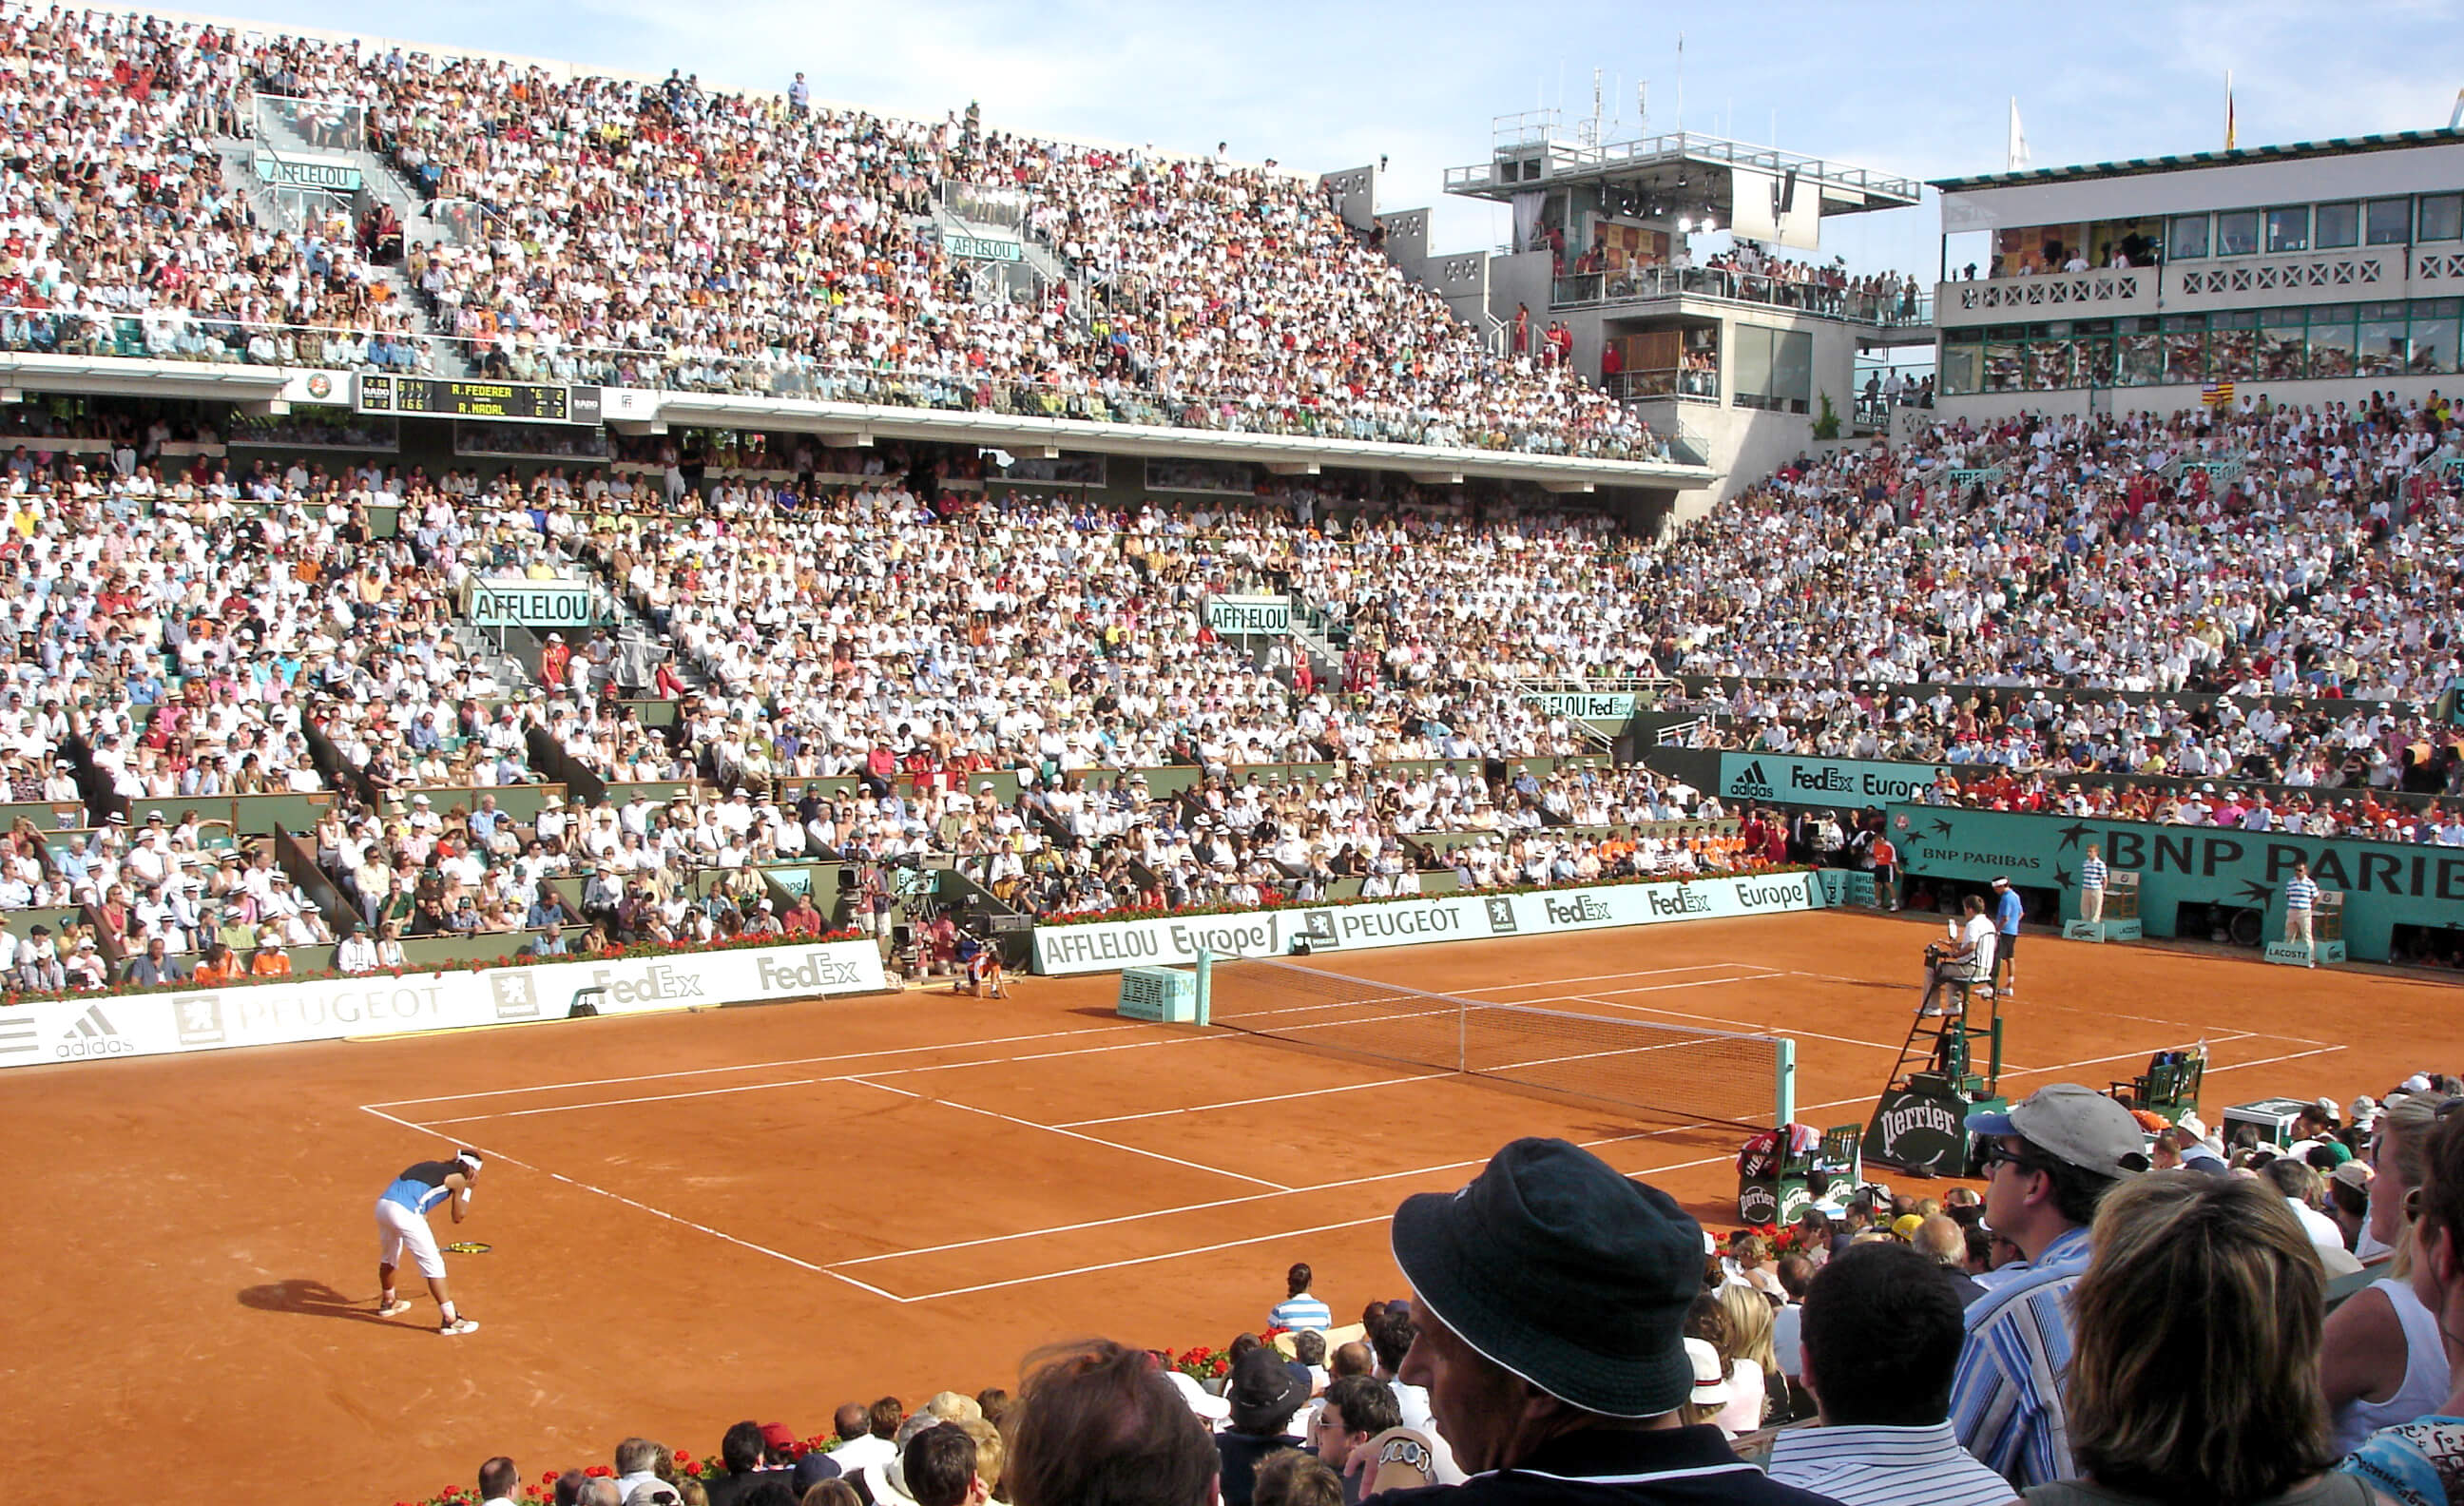 Results of the 2017 French Open